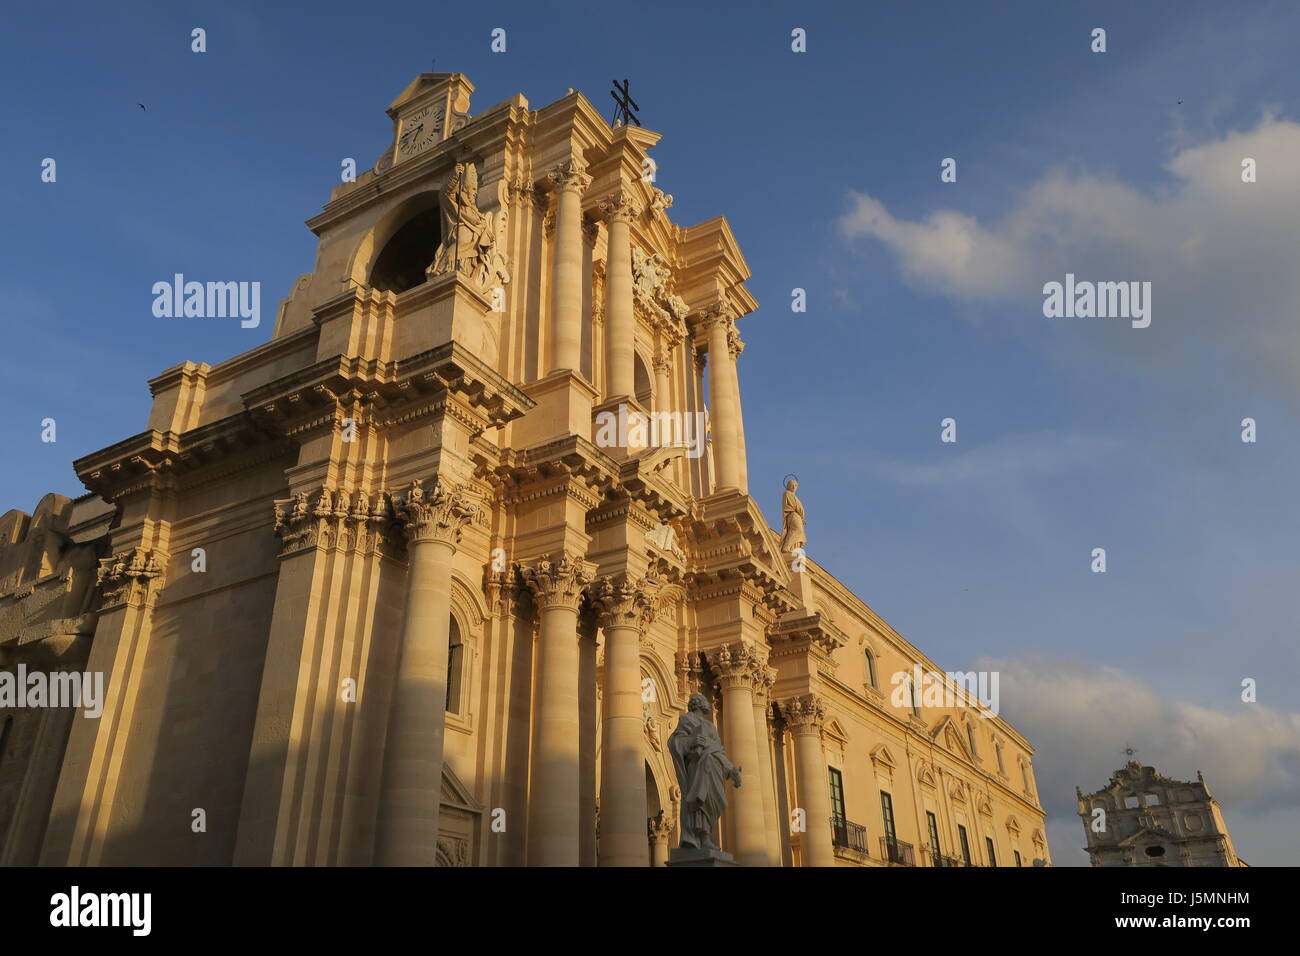 A mighty church in a square in Ortigia city on Sicily island in Italy. Very rick, decorated facade, columns in brown colour Stock Photo